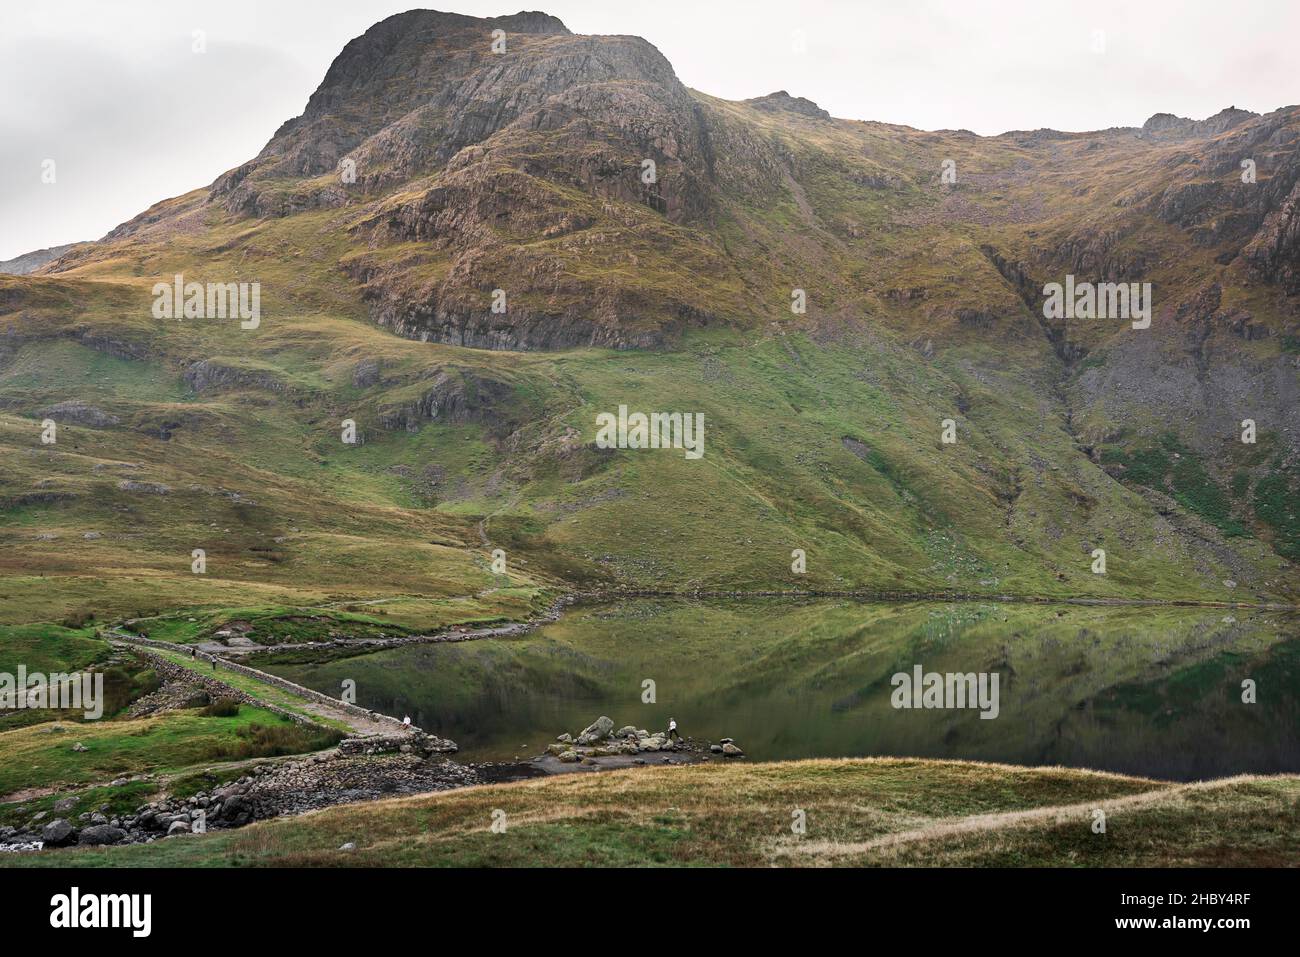 Stickle Tarn Cumbria, view of Stickle Tarn - a mountain lake set against the dramatic backdrop of the Langdale Pikes, Lake District, Cumbria, England Stock Photo